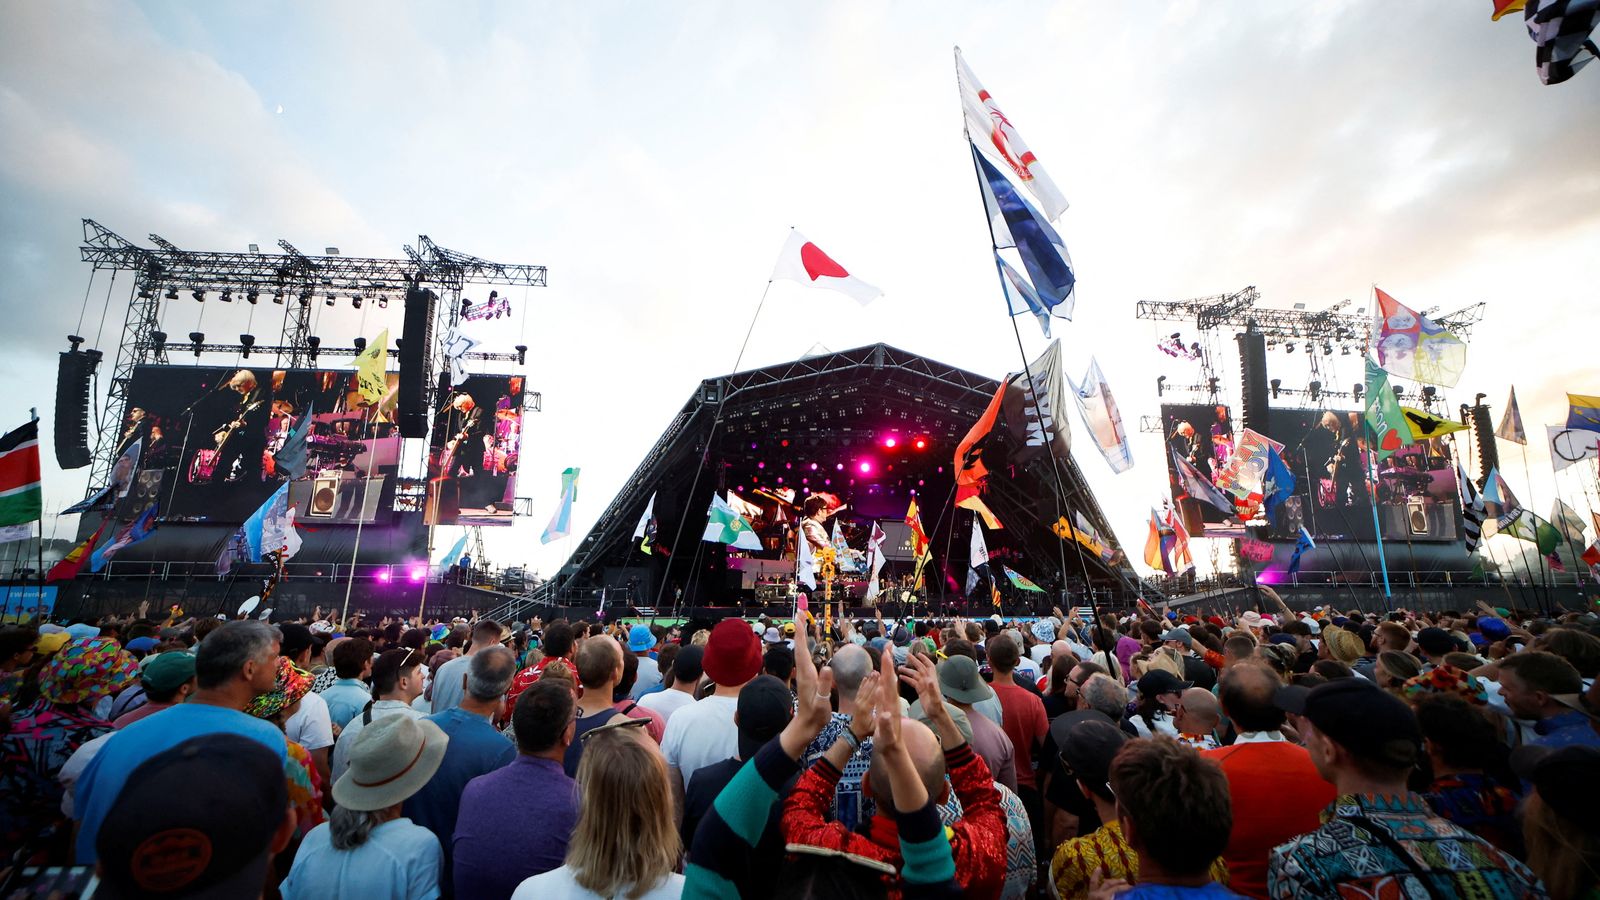 Glastonbury Festival tickets sell out in under an hour after 'demand greatly exceeded supply'